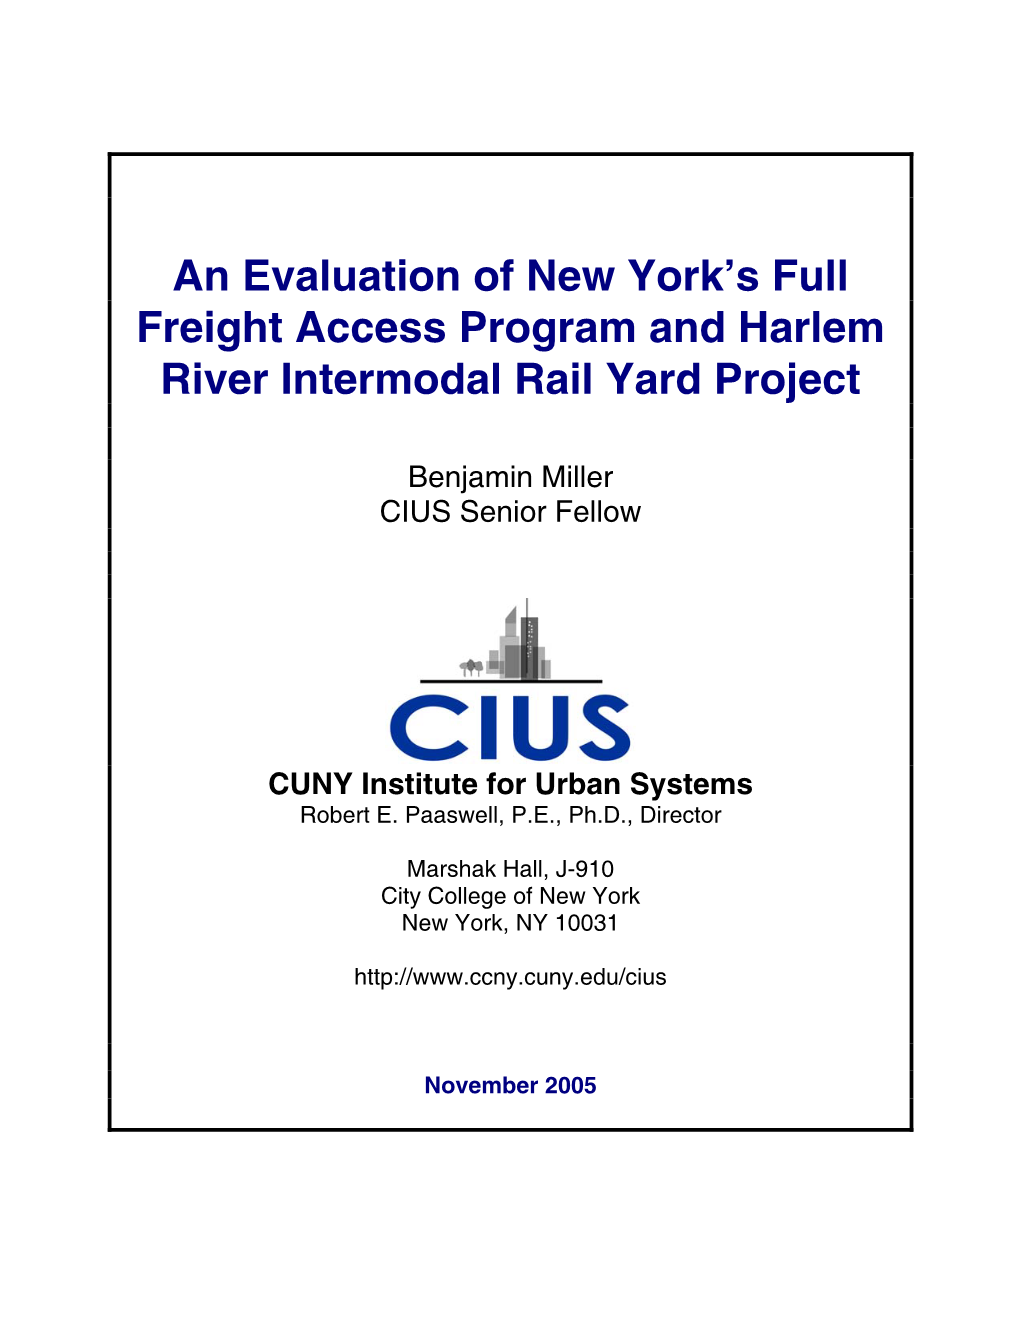 An Evaluation of New York's Full Freight Access Program And